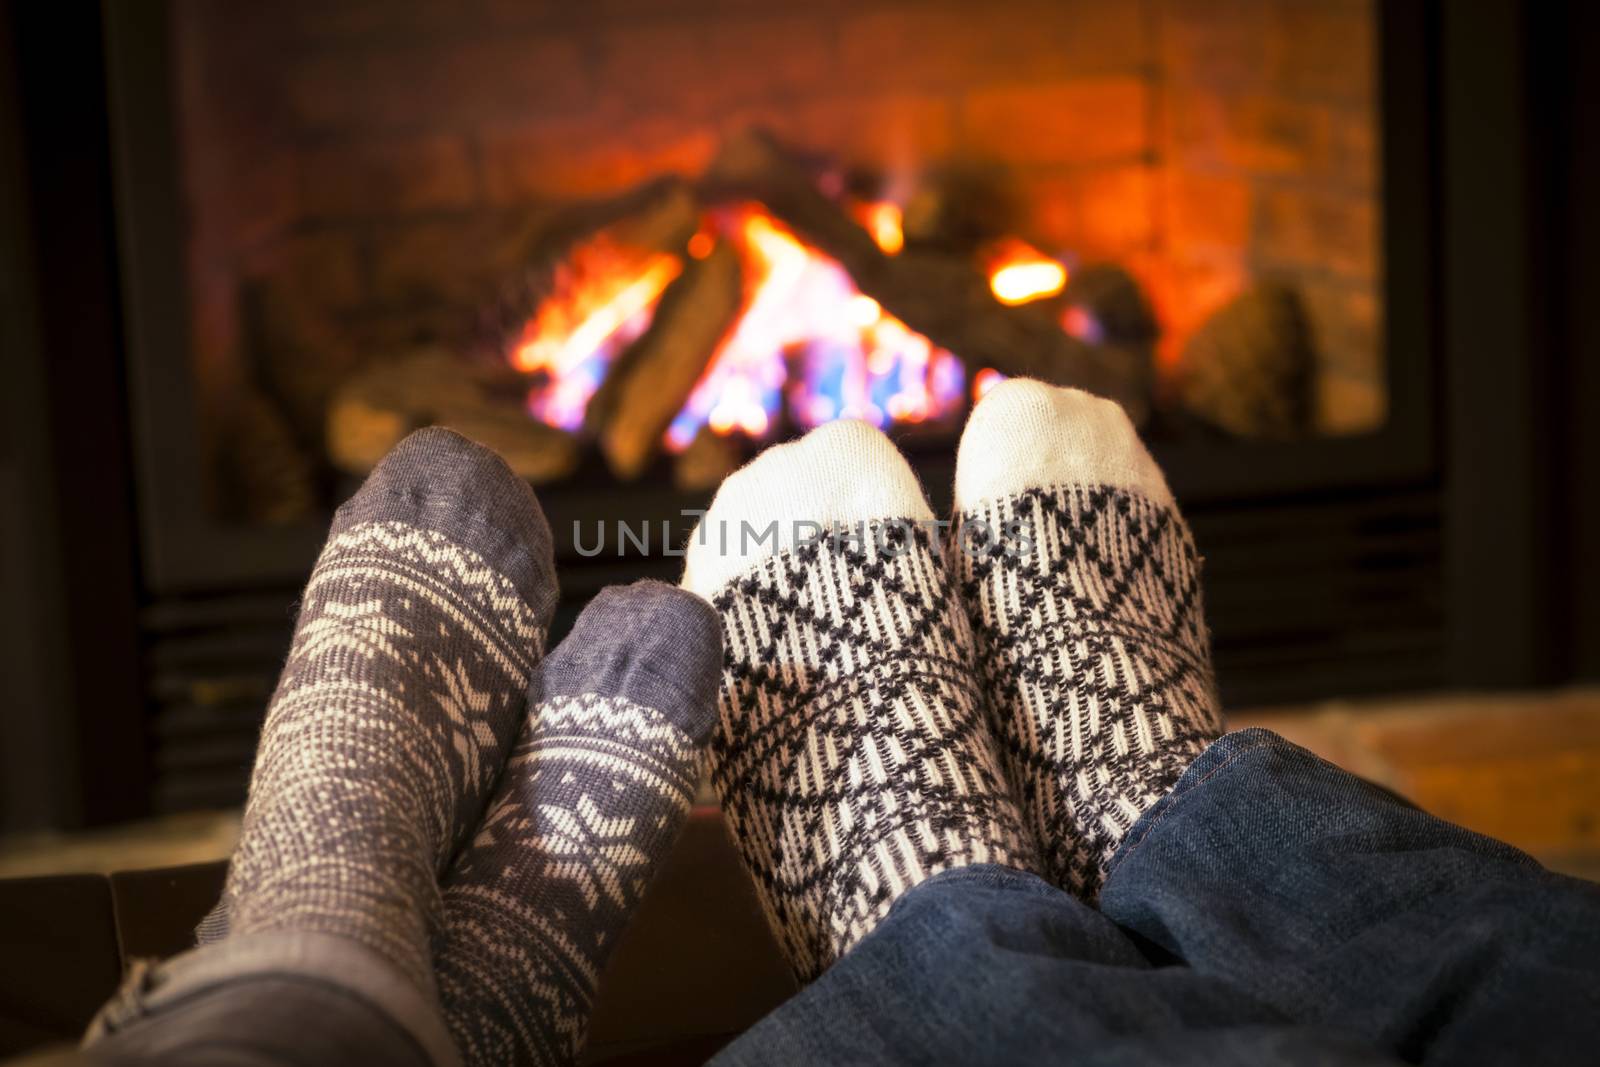 Feet warming by fireplace by elenathewise